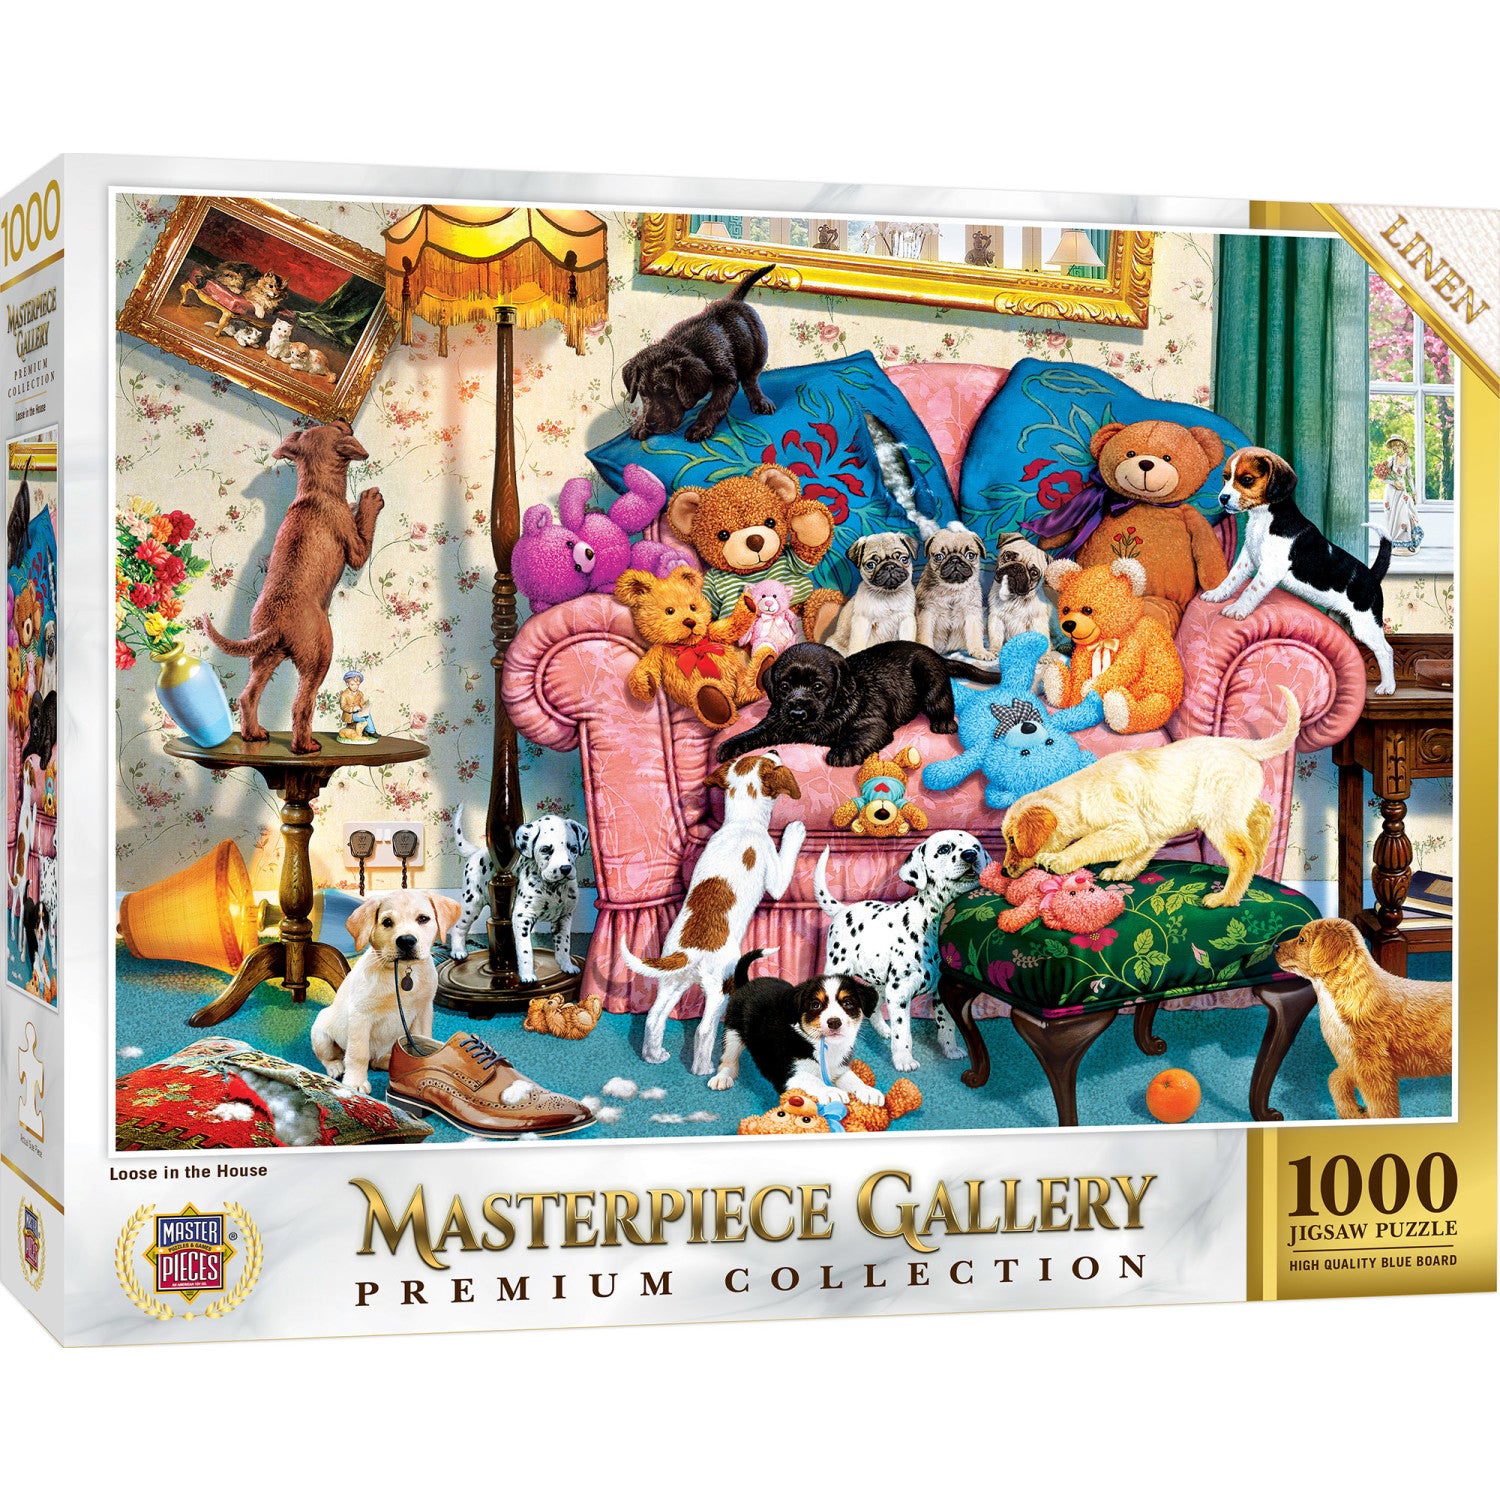 Masterpiece Gallery - Loose in the House 1000 Piece Jigsaw Puzzle